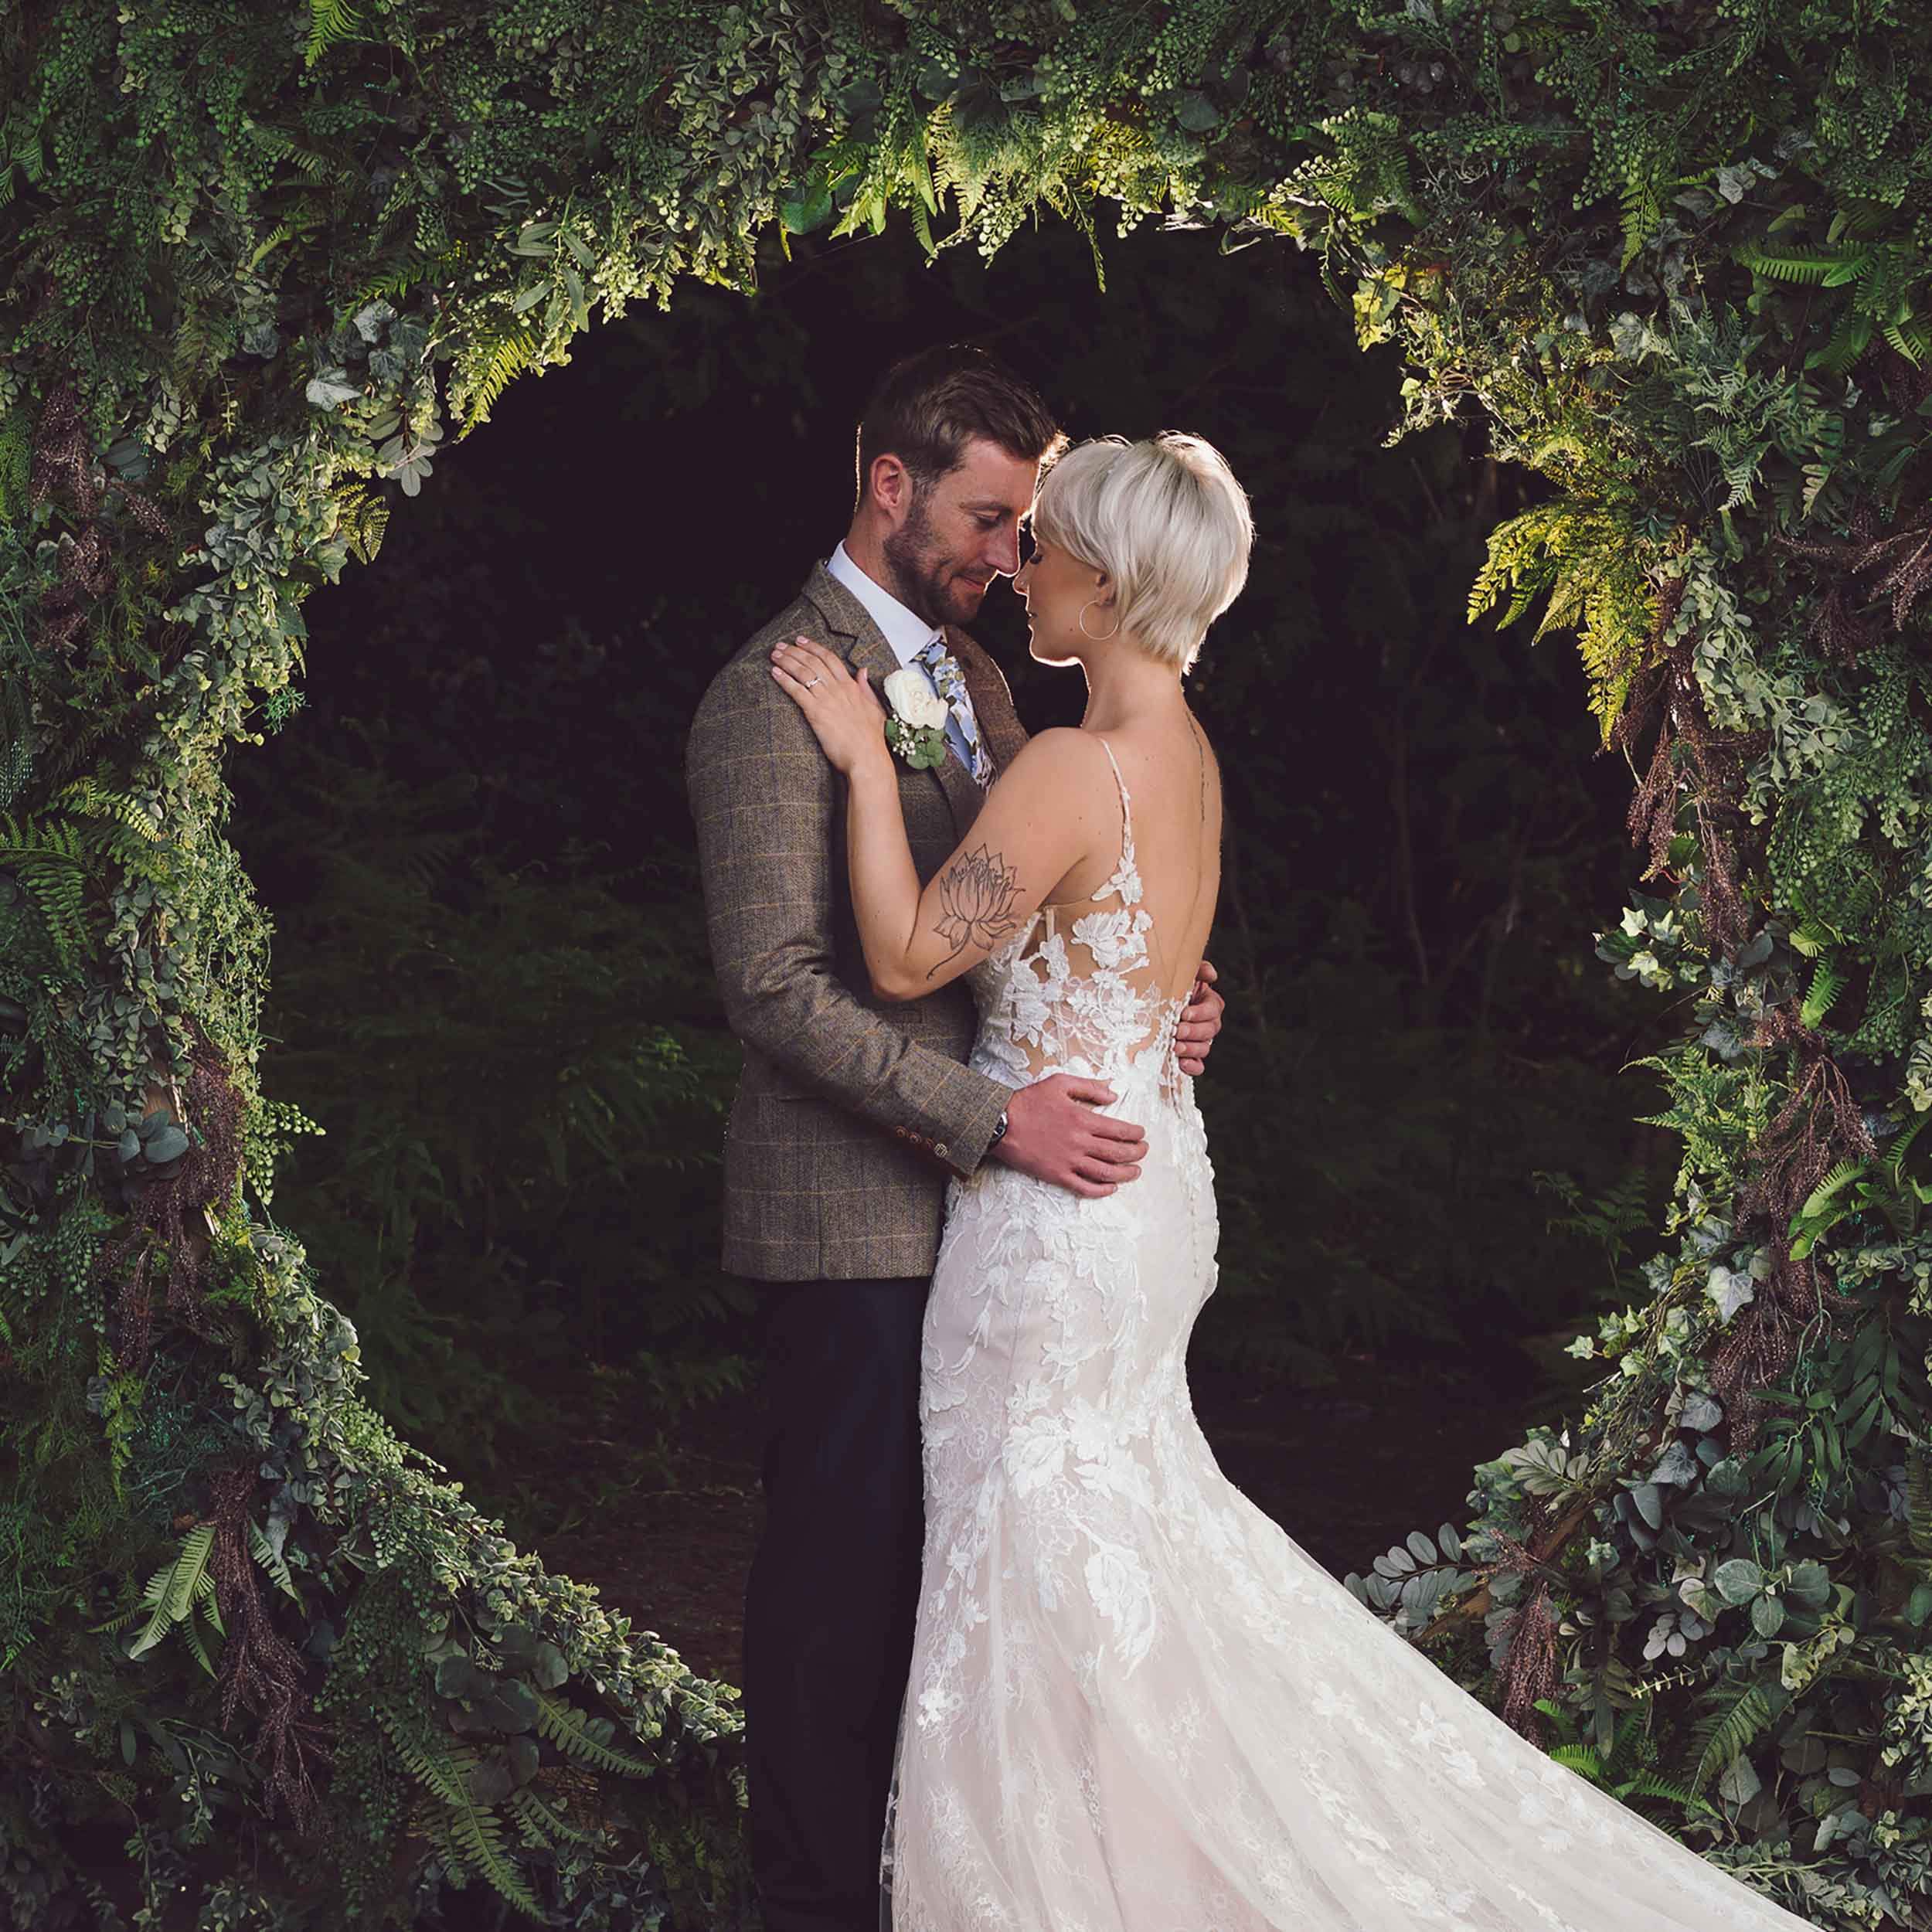 Bride & Groom embrace in front of foliage circle at Cheshire woodland weddings